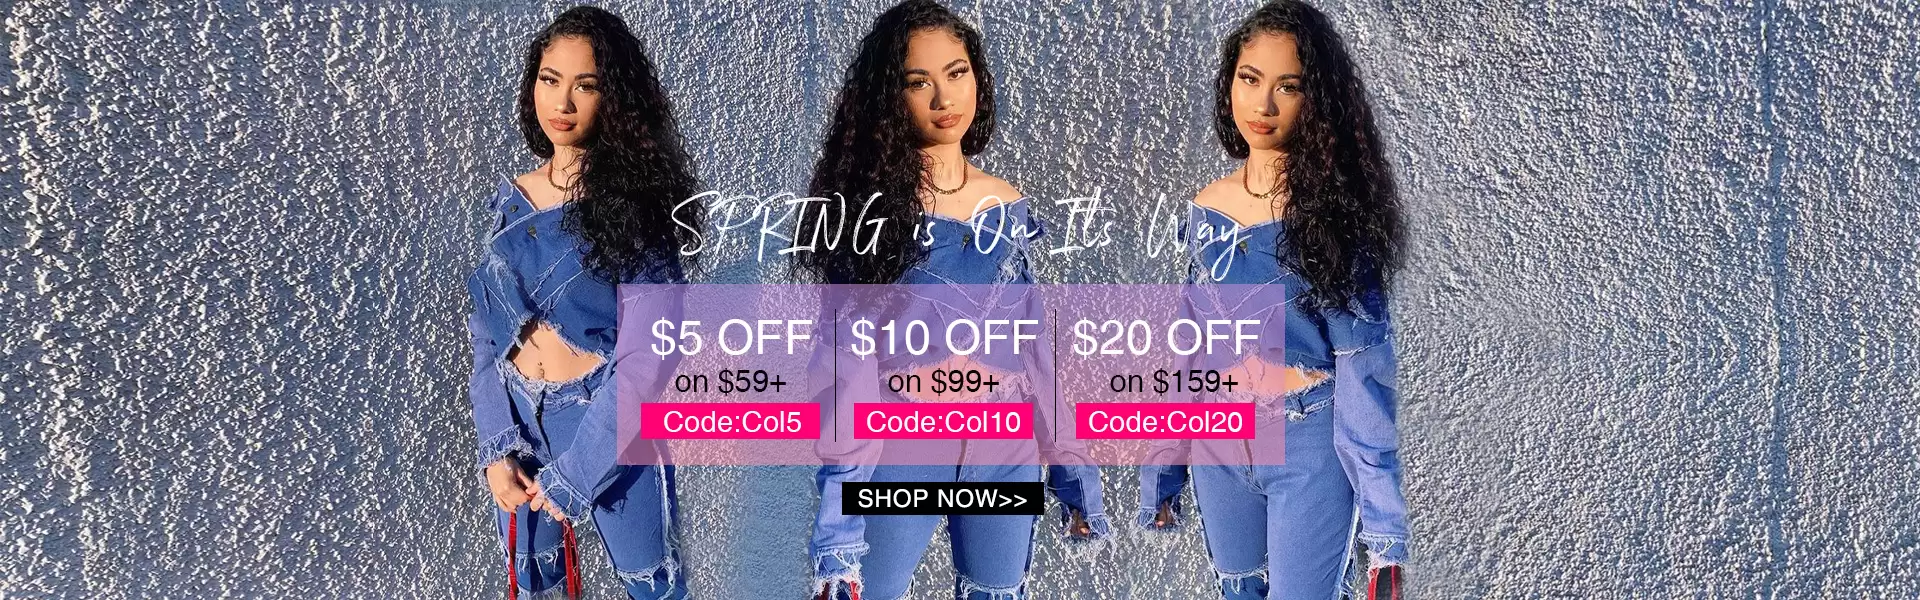 Get Upto $20 Off On Spring Collection With This Discount Coupon At Jurllyshe.Com